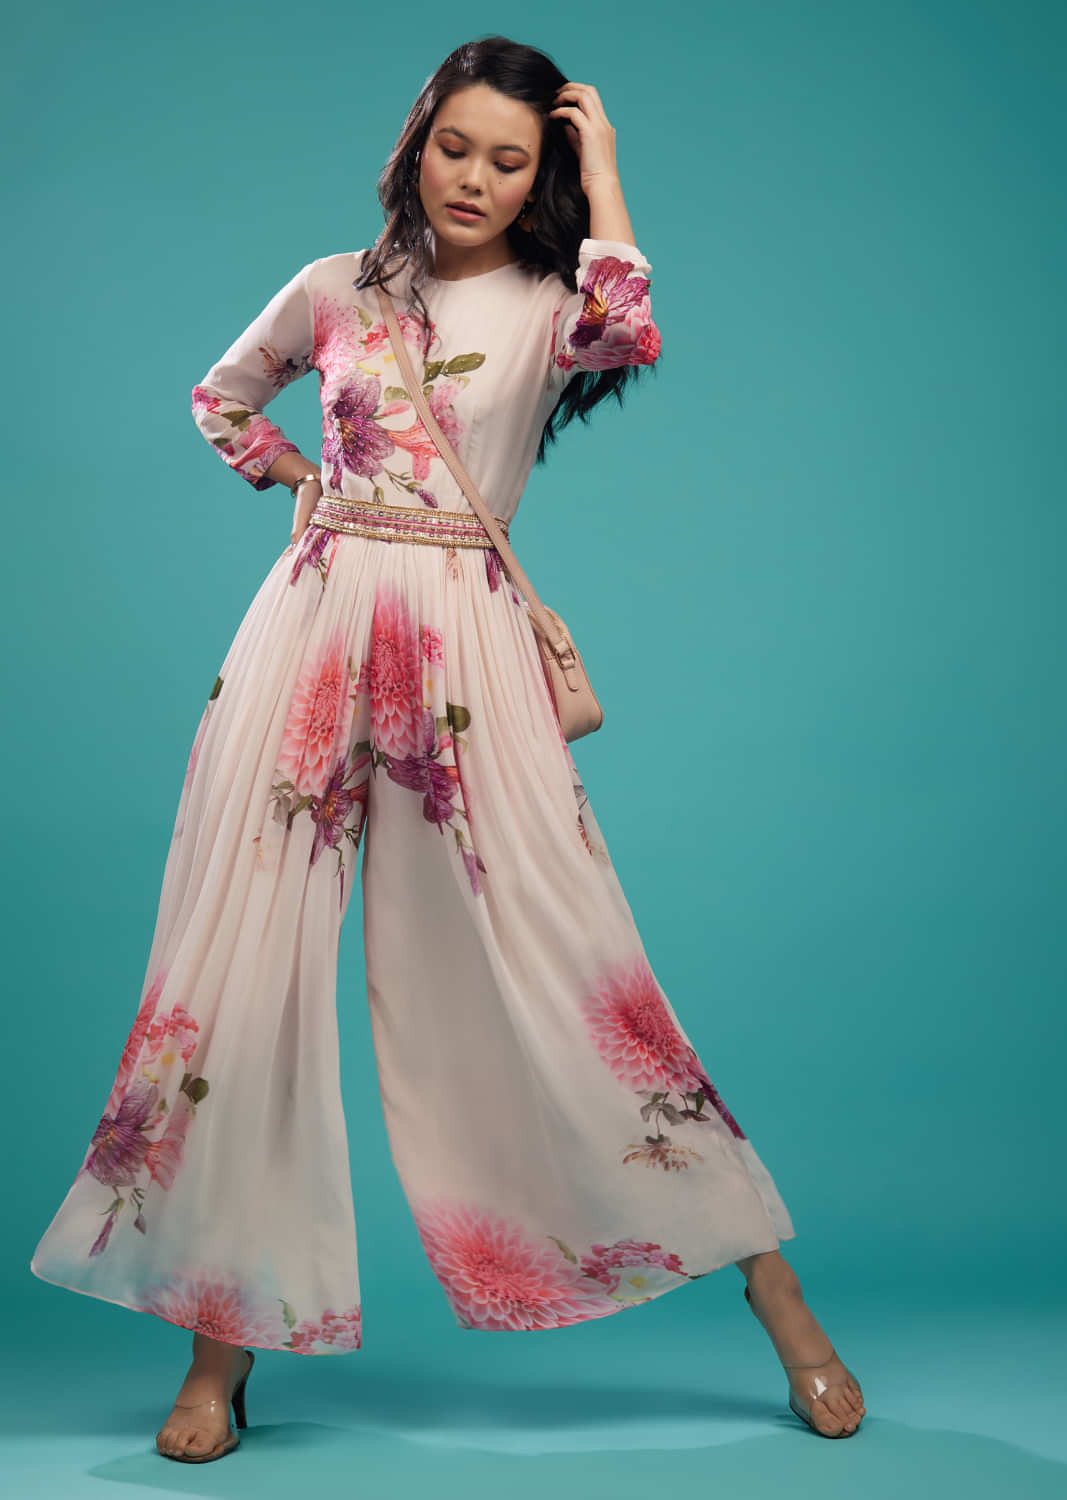 Candy Pink Pleated Jumpsuit In Floral Print And Hand Embroidered Waist Belt